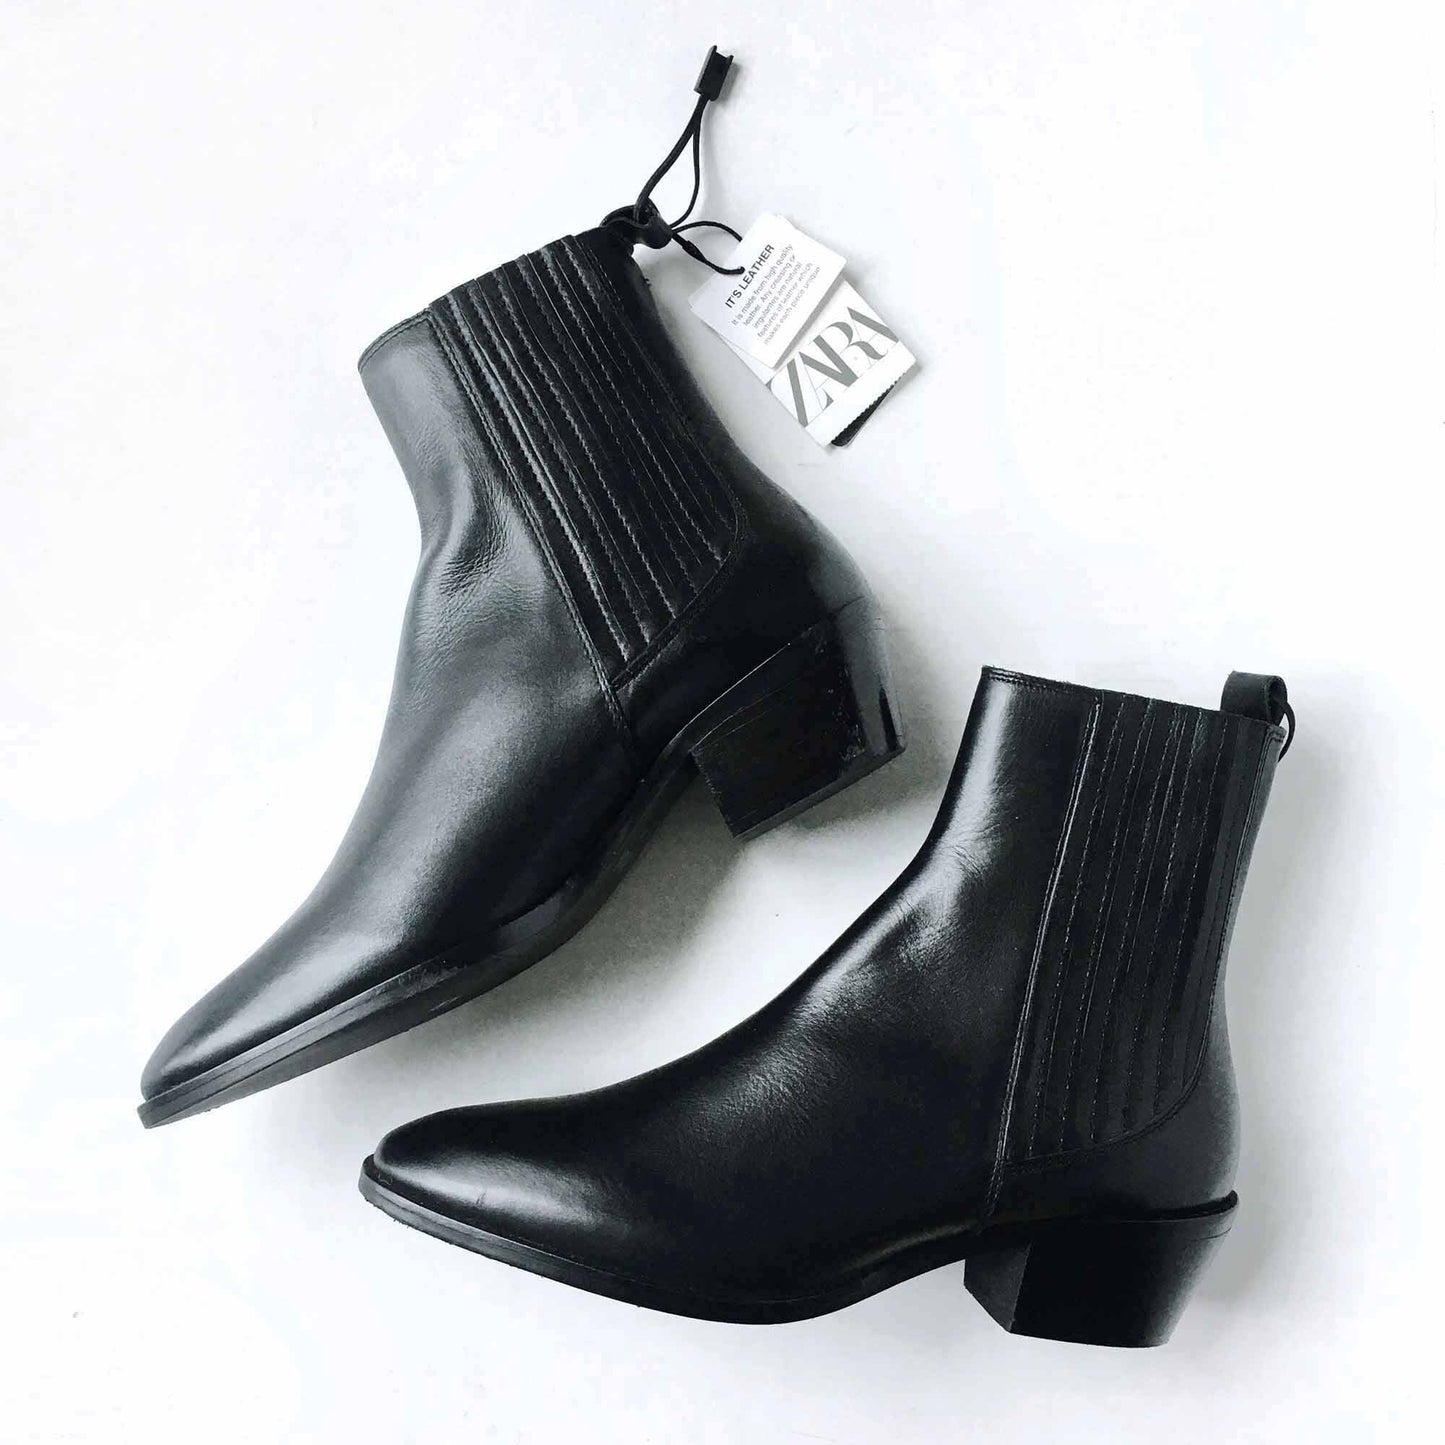 Zara black leather ankle boot - size 8